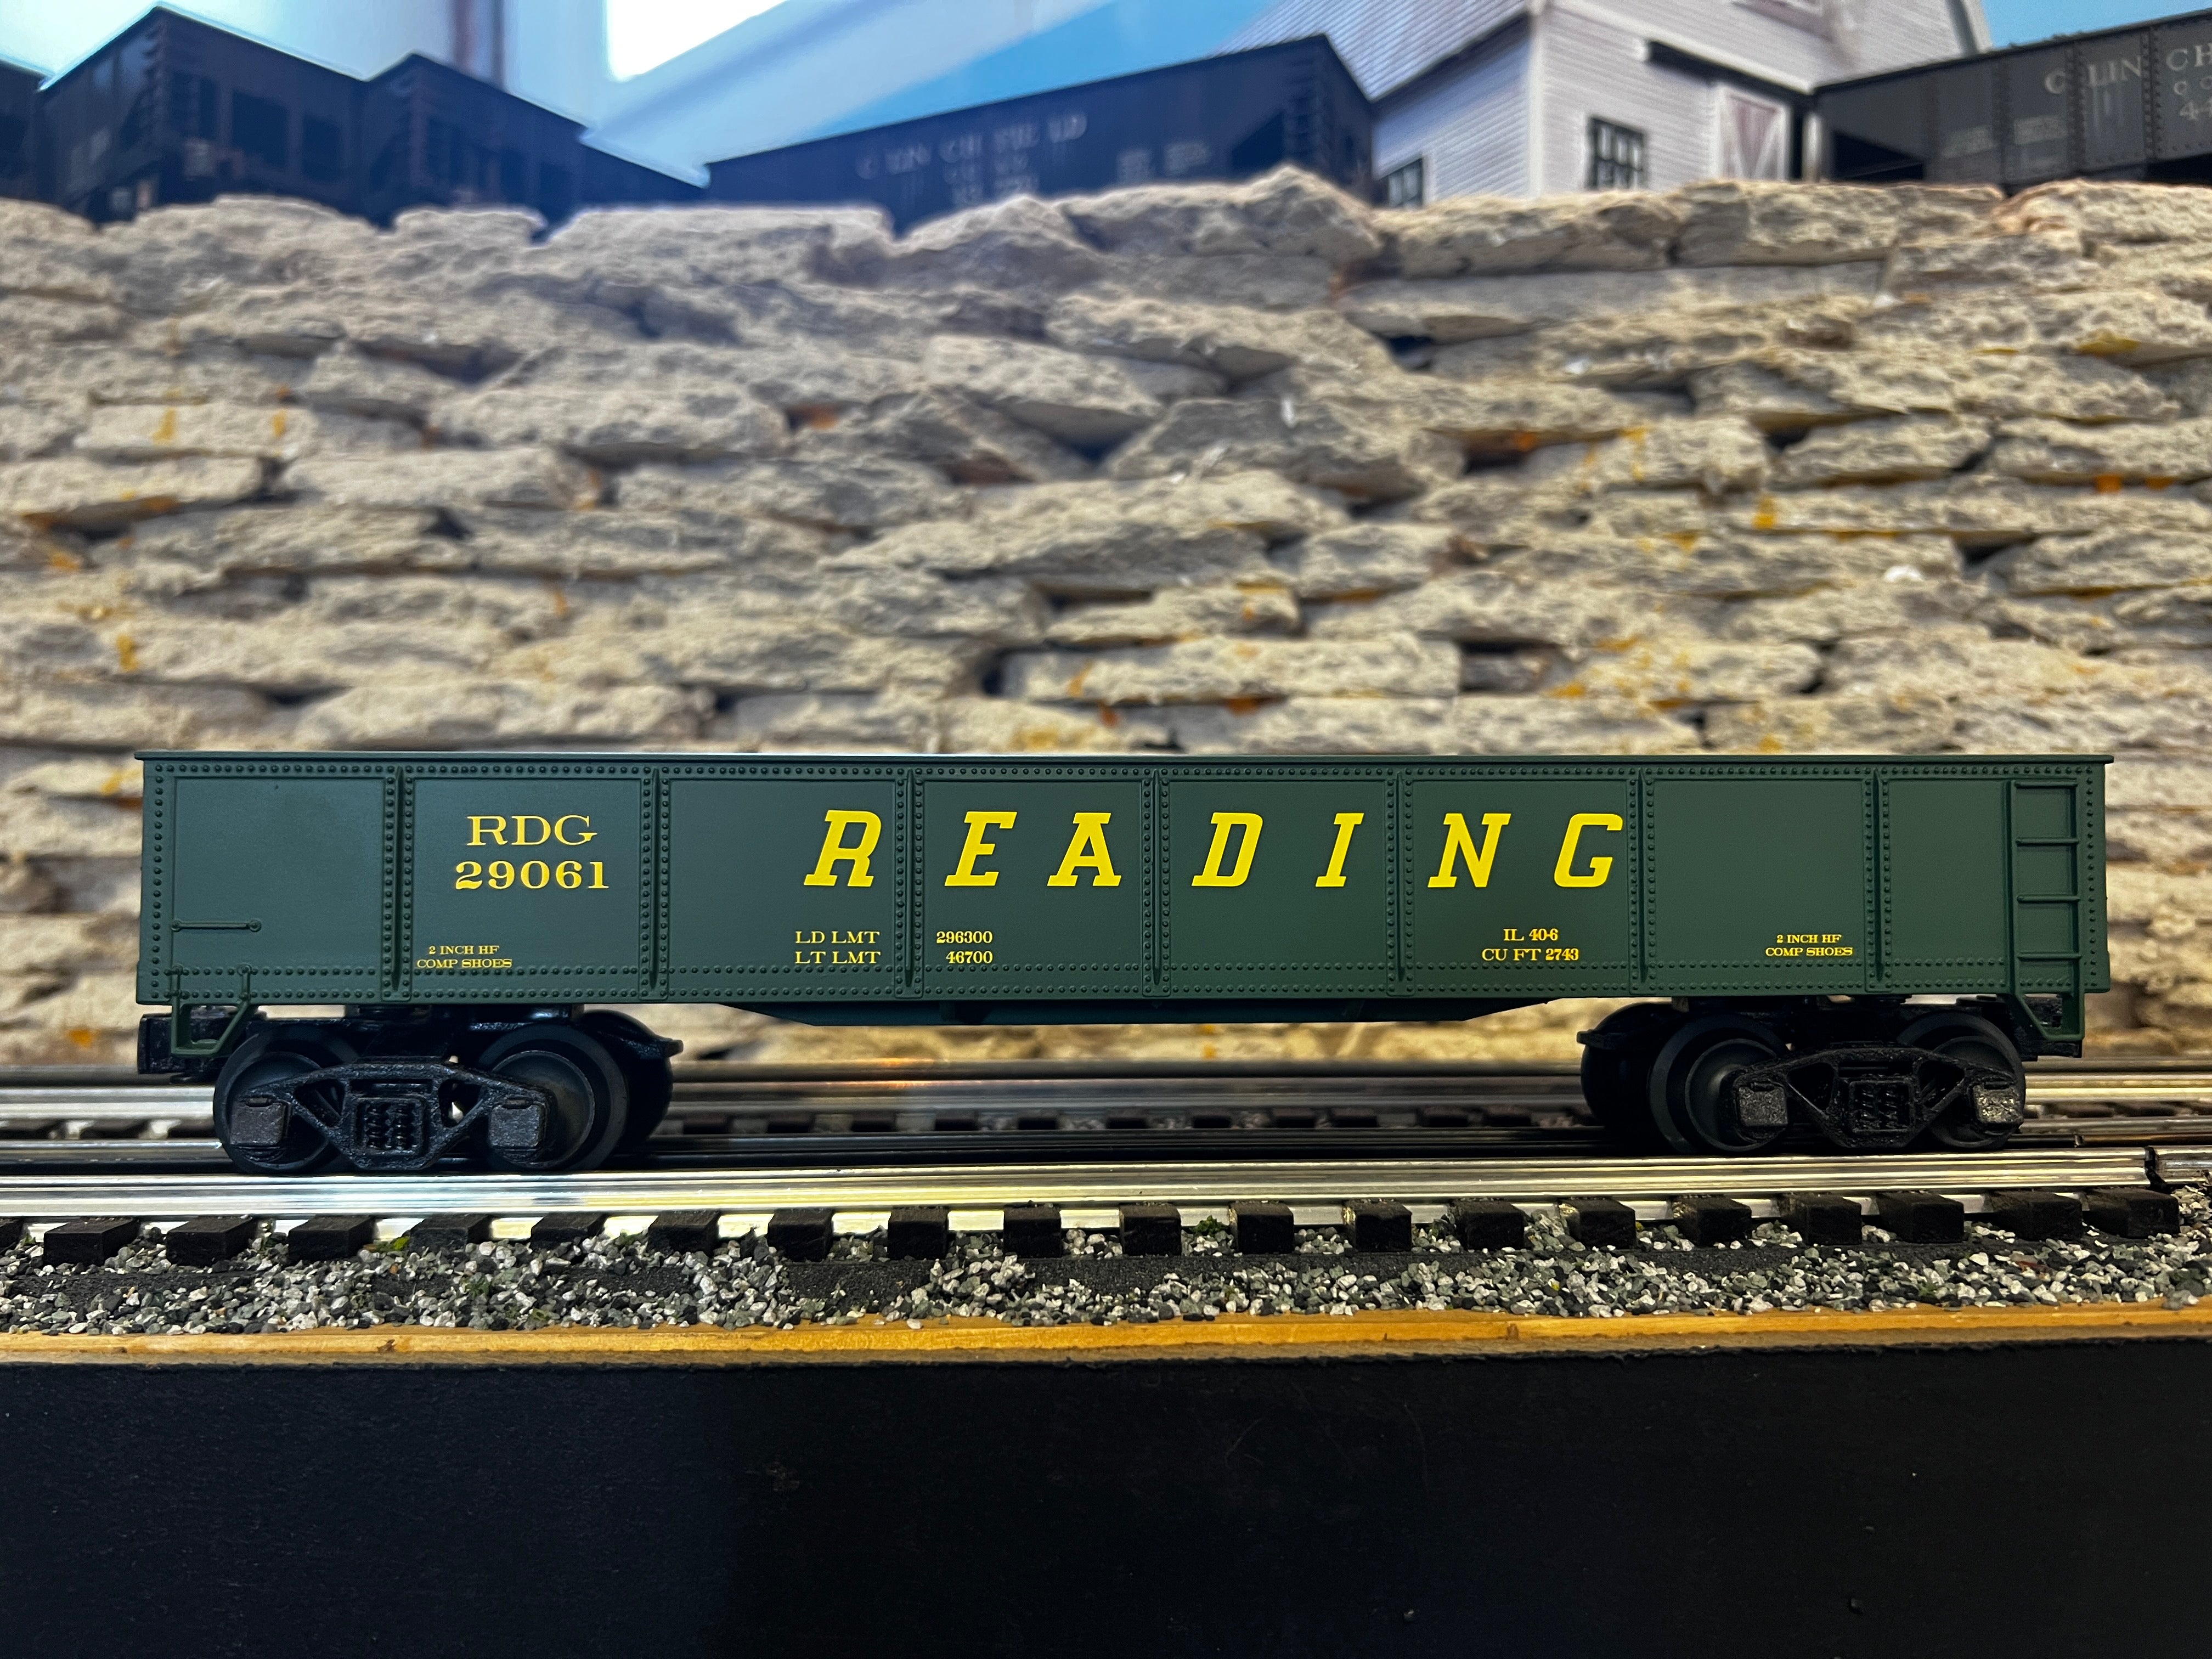 Unboxed Rolling Stock - A pair of Reading Gondolas - 2 Cars - 1 has a broken truck - Second Hand